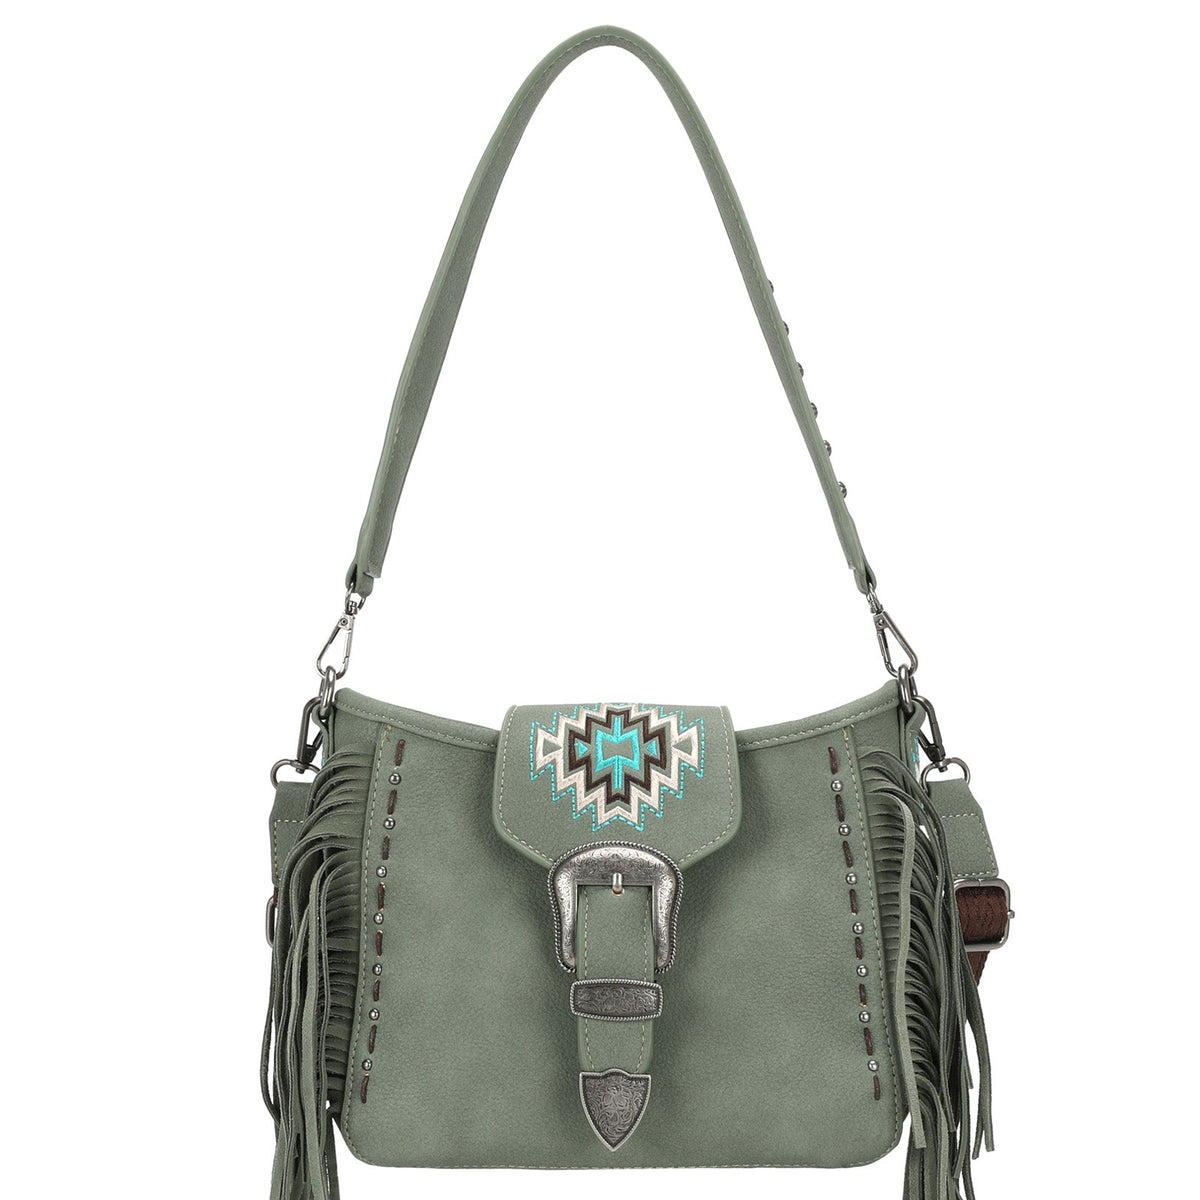 Montana West Aztec Collection Hobo/Crossbody - Cowgirl Wear